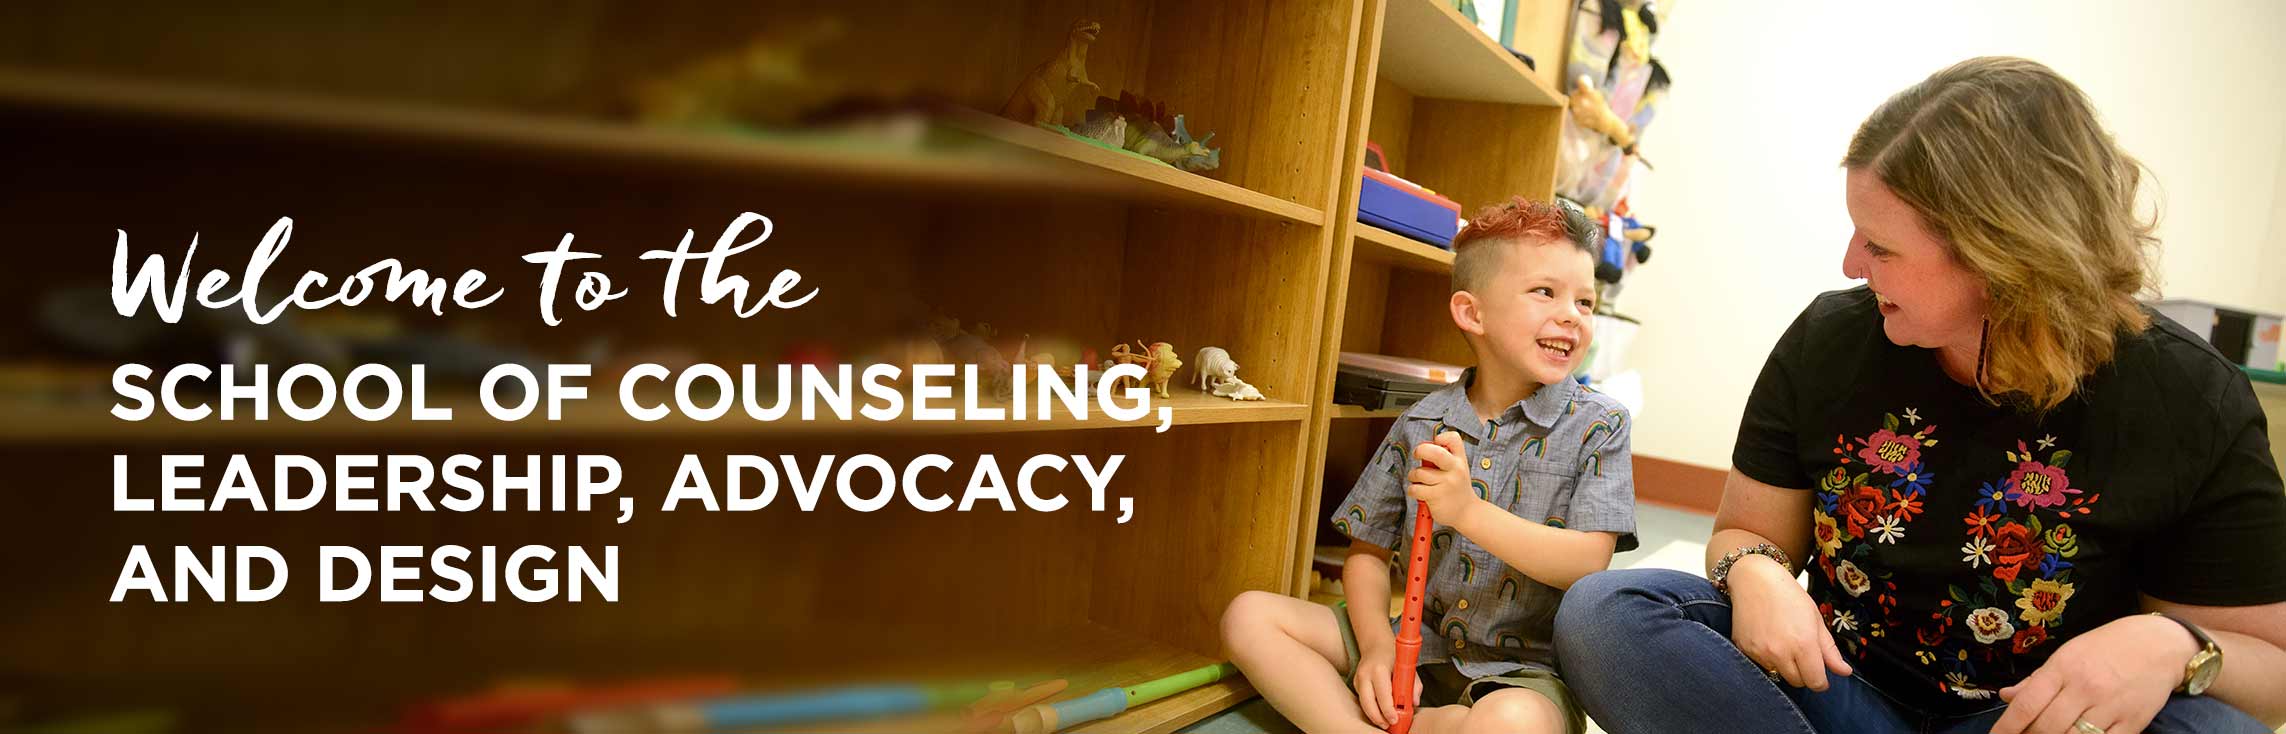 Counseler with play therapy, with wording: Welcome to the School of Counseling, Leadership, Advocacy, and Design